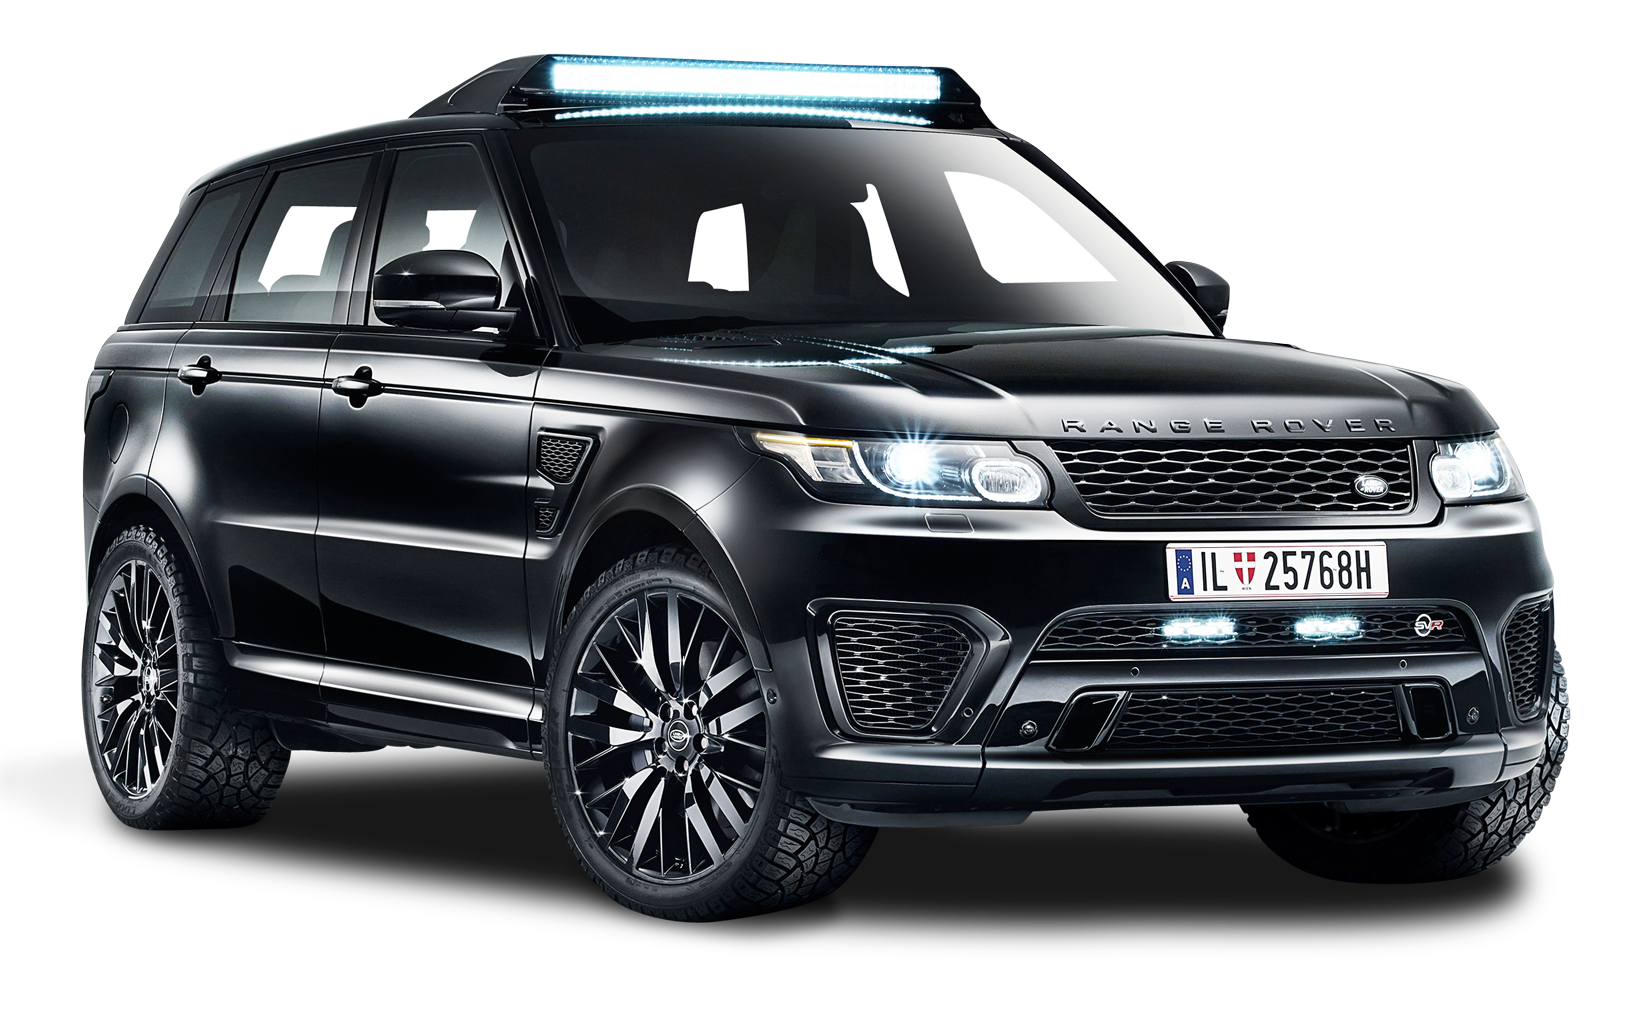 Land Rover Range Rover Sport Photo PNG Image